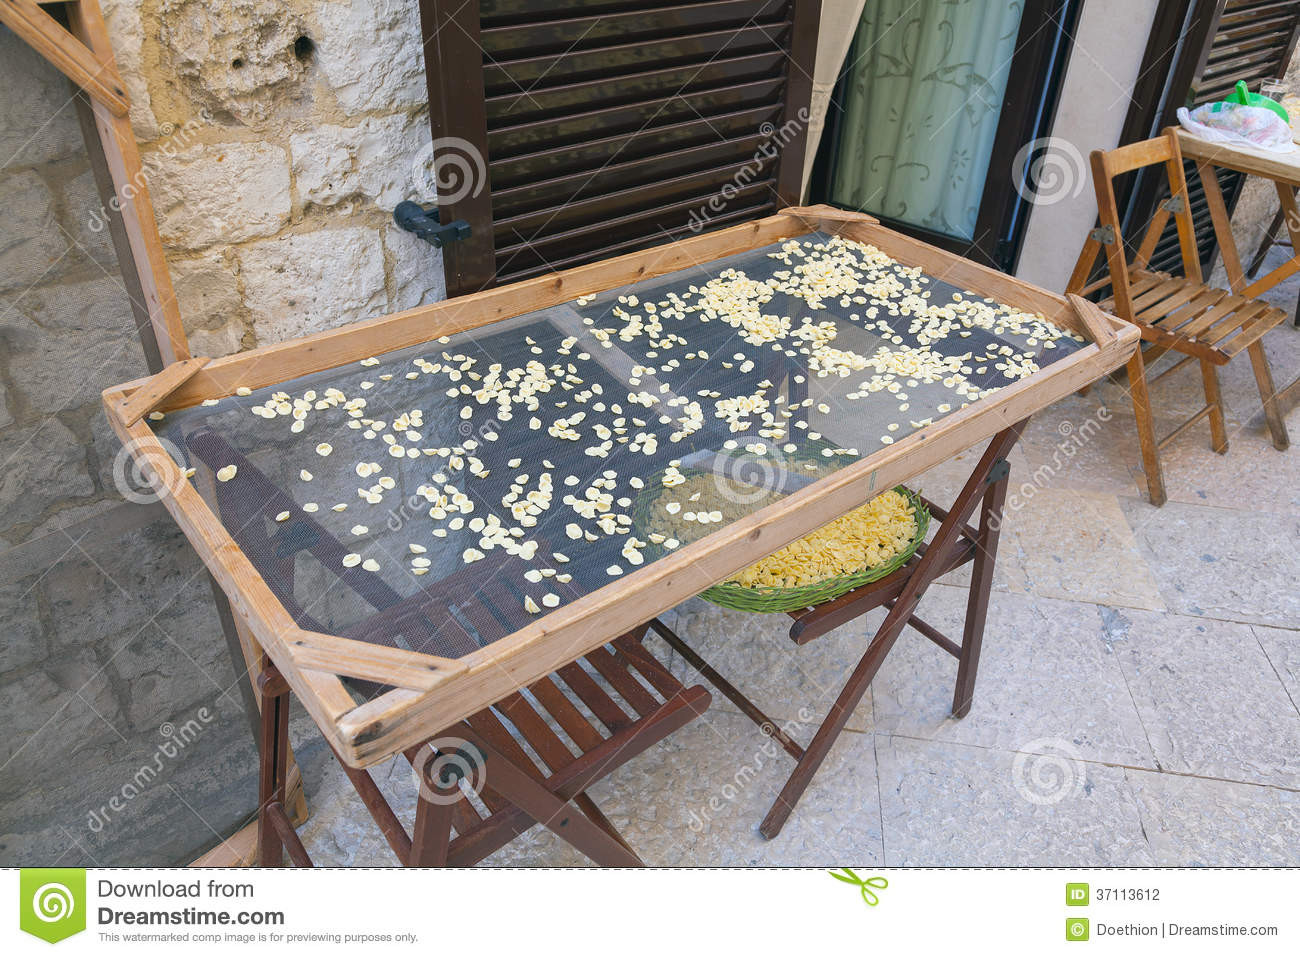 Drying Homemade Pasta
 Homemade Pasta Drying Outdoors Stock graphy Image